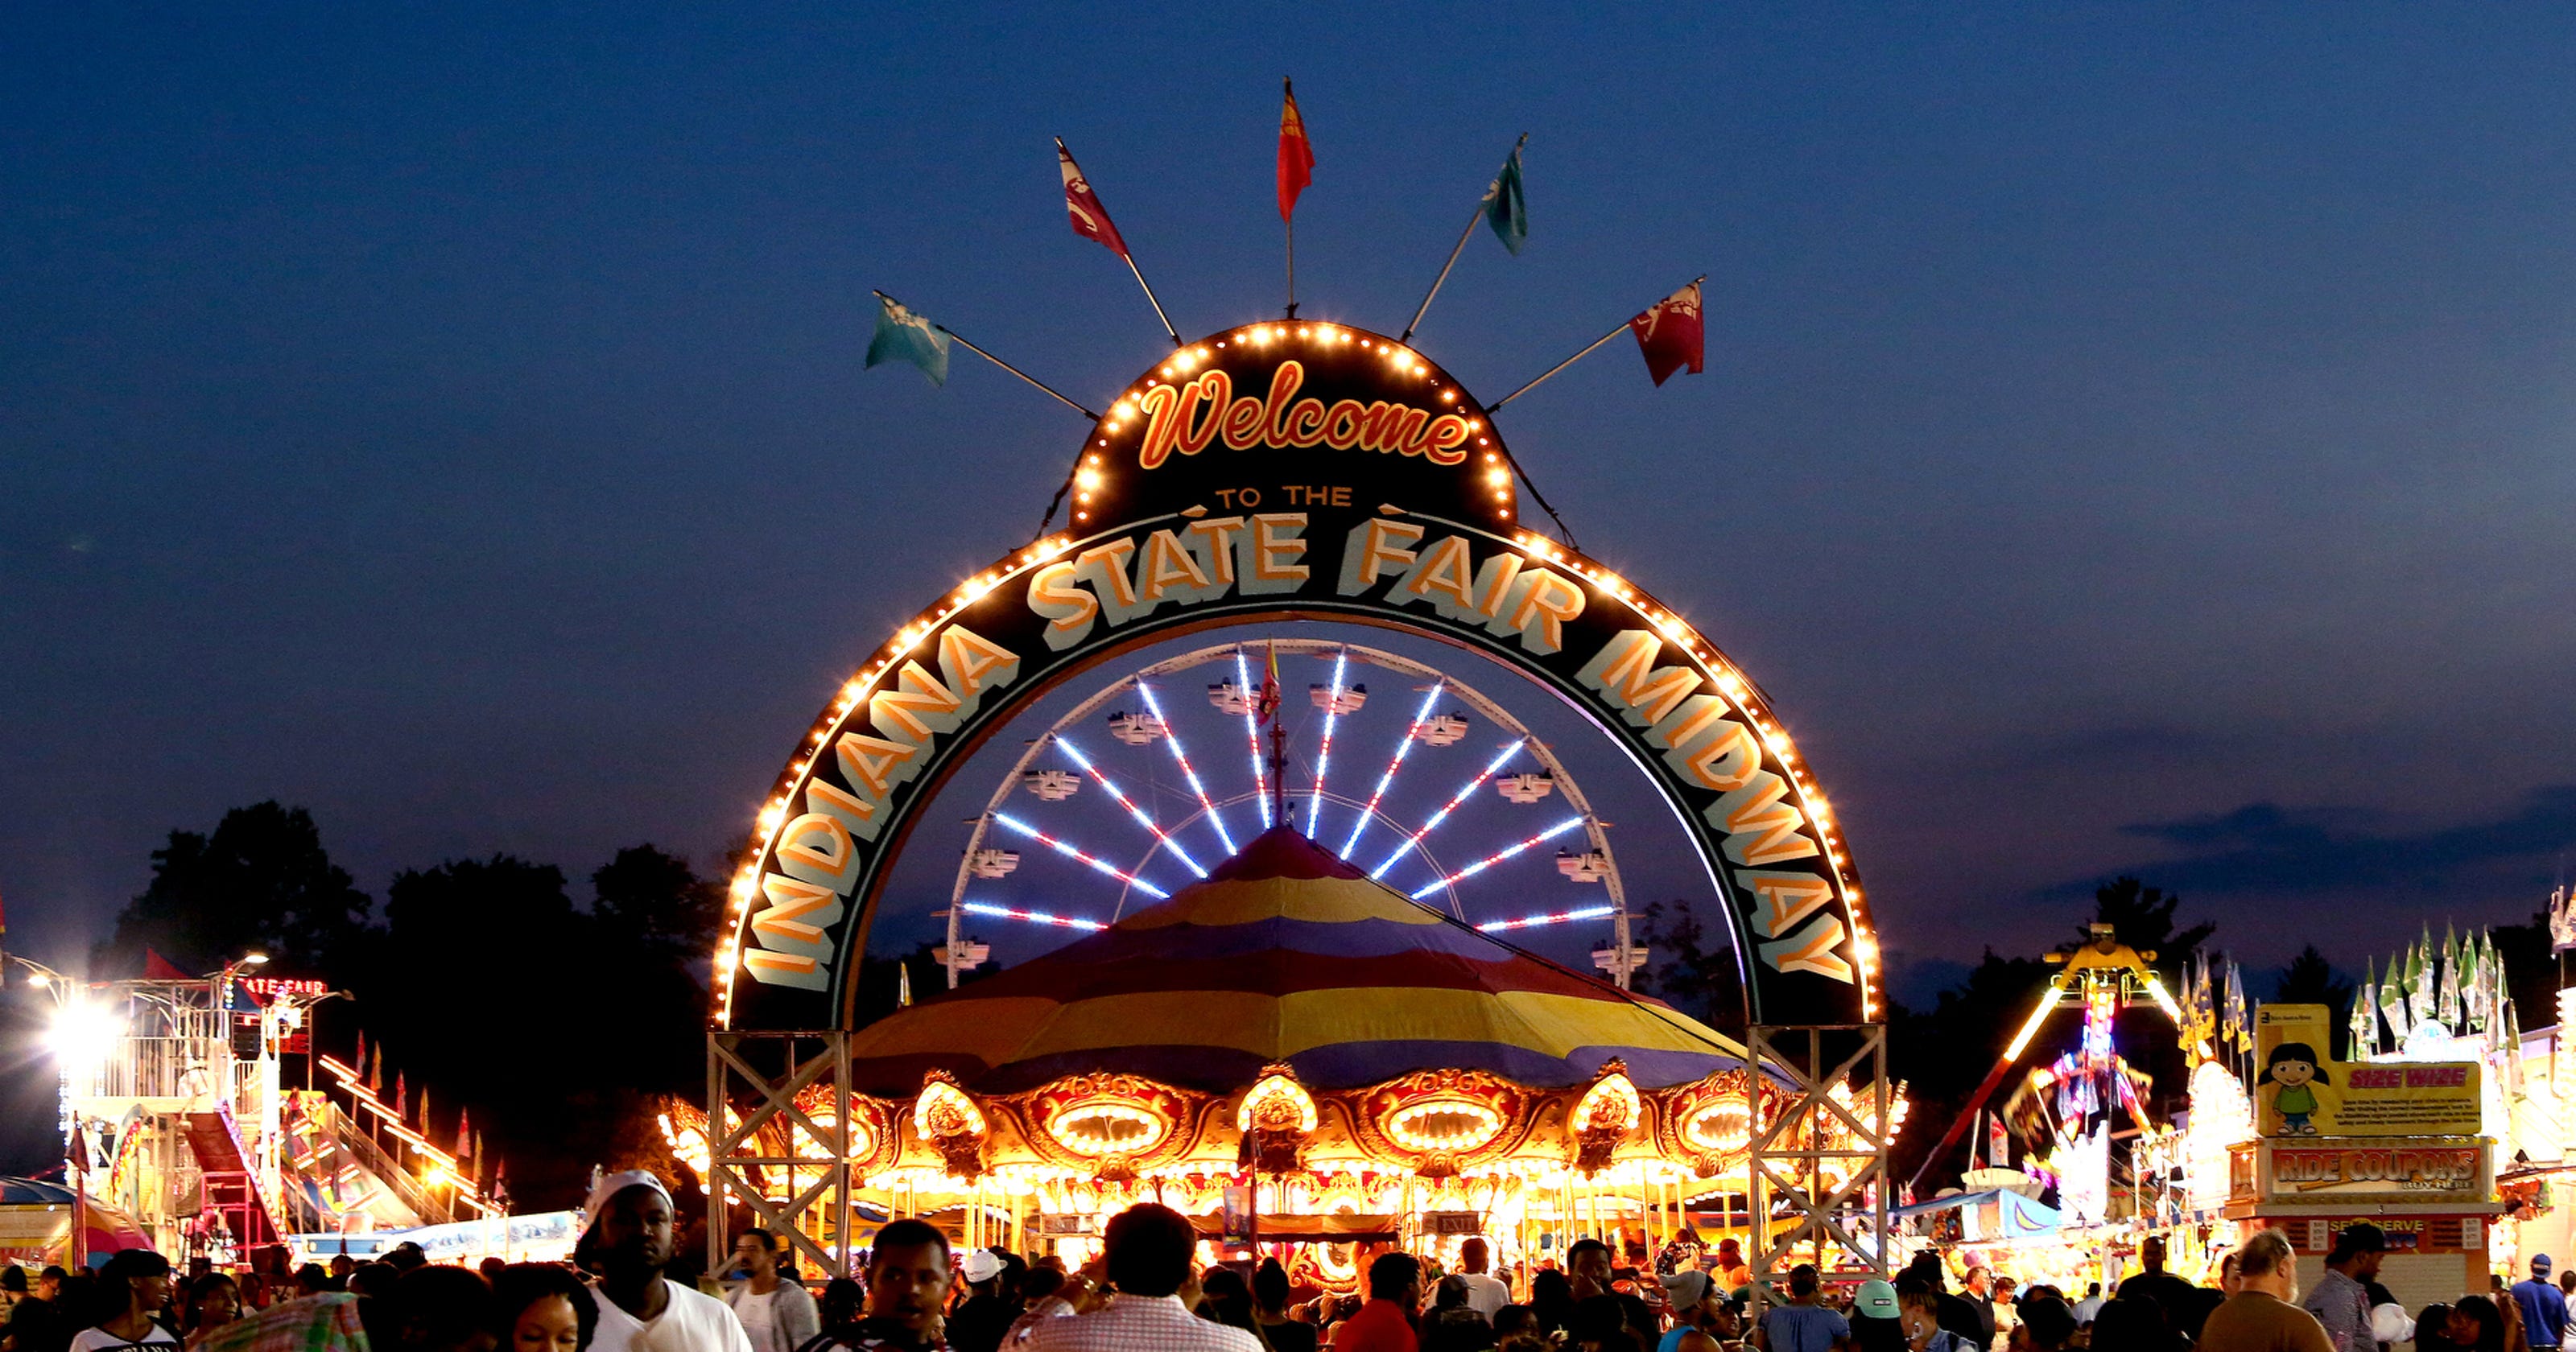 Indiana State Fair 2018 dates, ticket prices, concerts and more